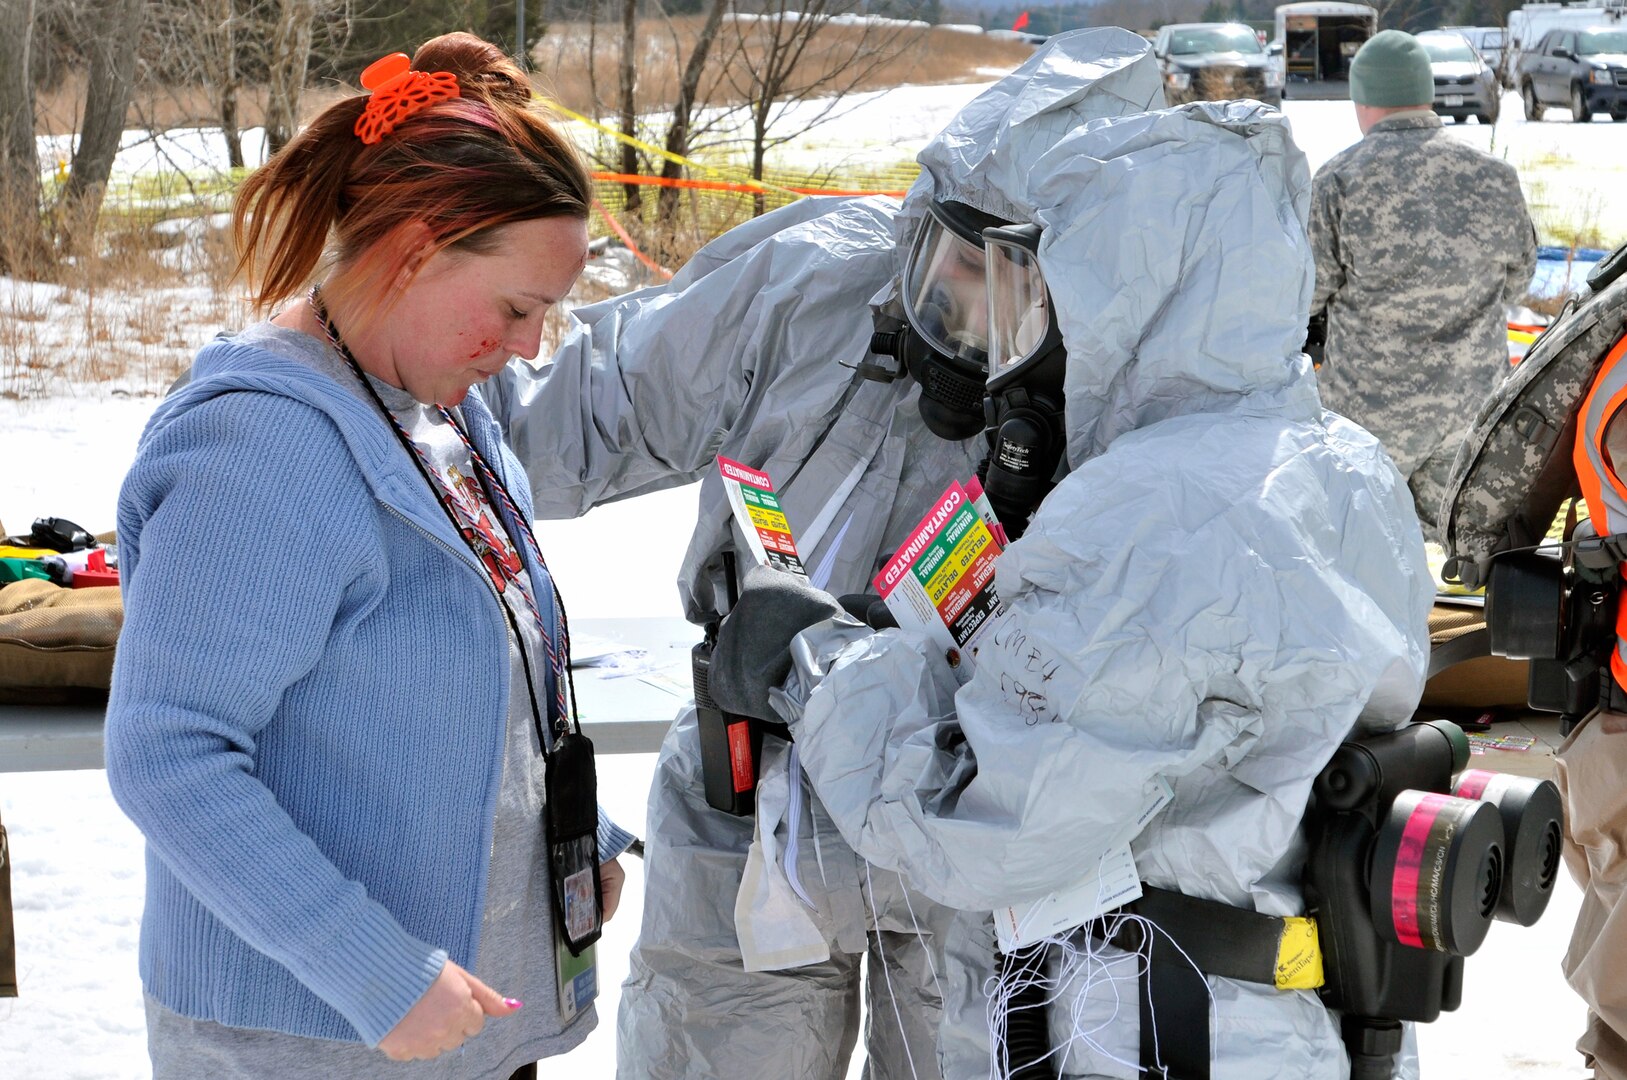 Members of the Texas National Guard’s Joint Task Force 136 (Maneuver Enhancement Brigade) conduct the second phase of their 2014 Homeland Response Force external evaluation at Camp Gruber, Okla. The exercise tests their response times, support capabilities and interagency cooperation, which certifies the unit to conduct emergency response operations throughout FEMA Region VI for another three years